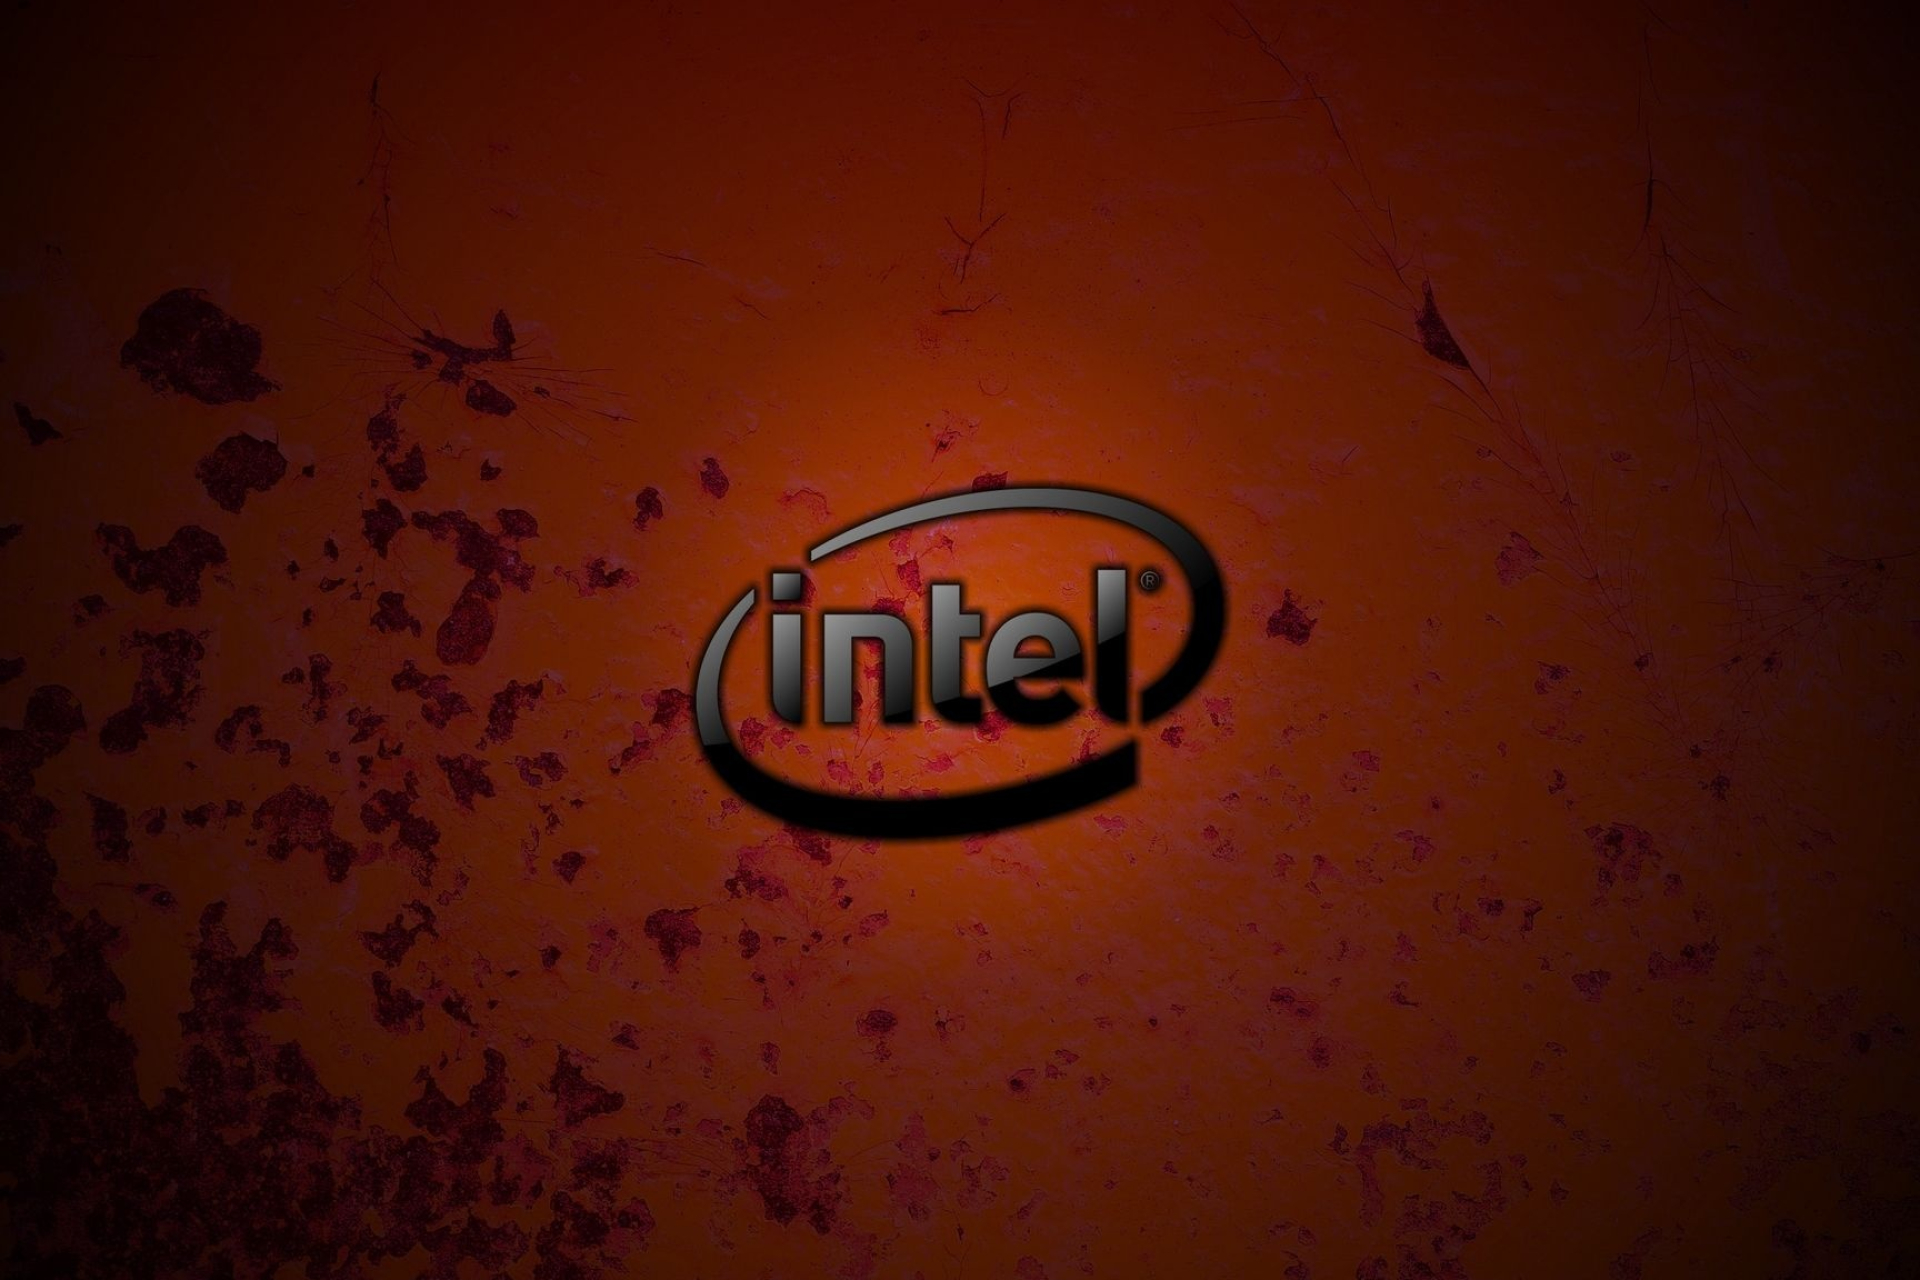 Red Intel Wallpapers - Top Free Red Intel Backgrounds 1920x1280